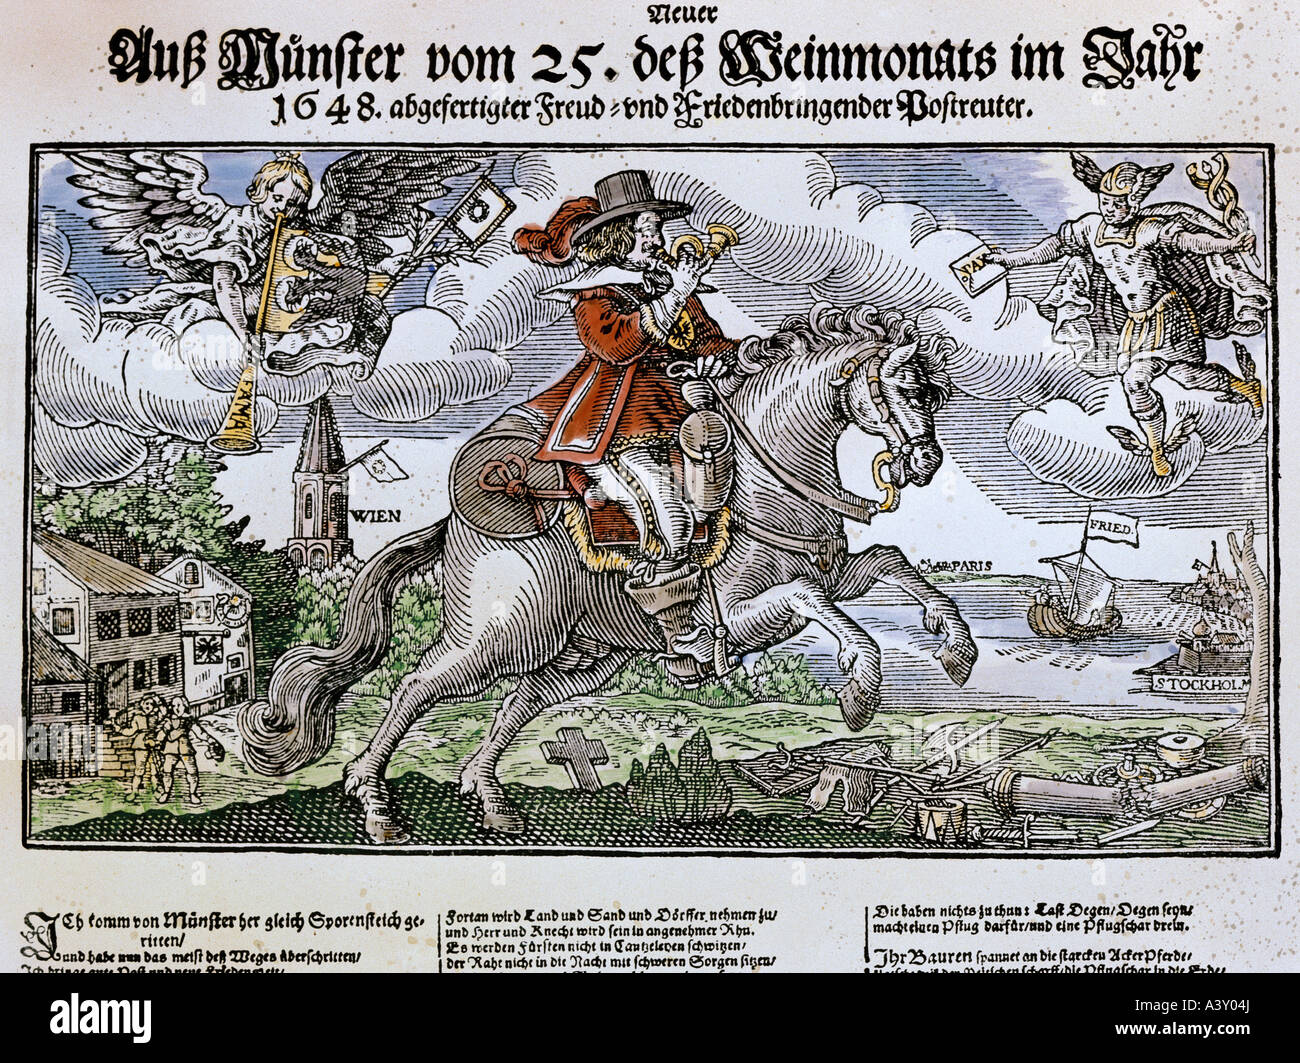 events, Thirty Years War 1618 - 1648, peace of Westphalia 1648, messenger with peace message, colour woodcut, Augsburg or Nuremberg, private collection, , Stock Photo